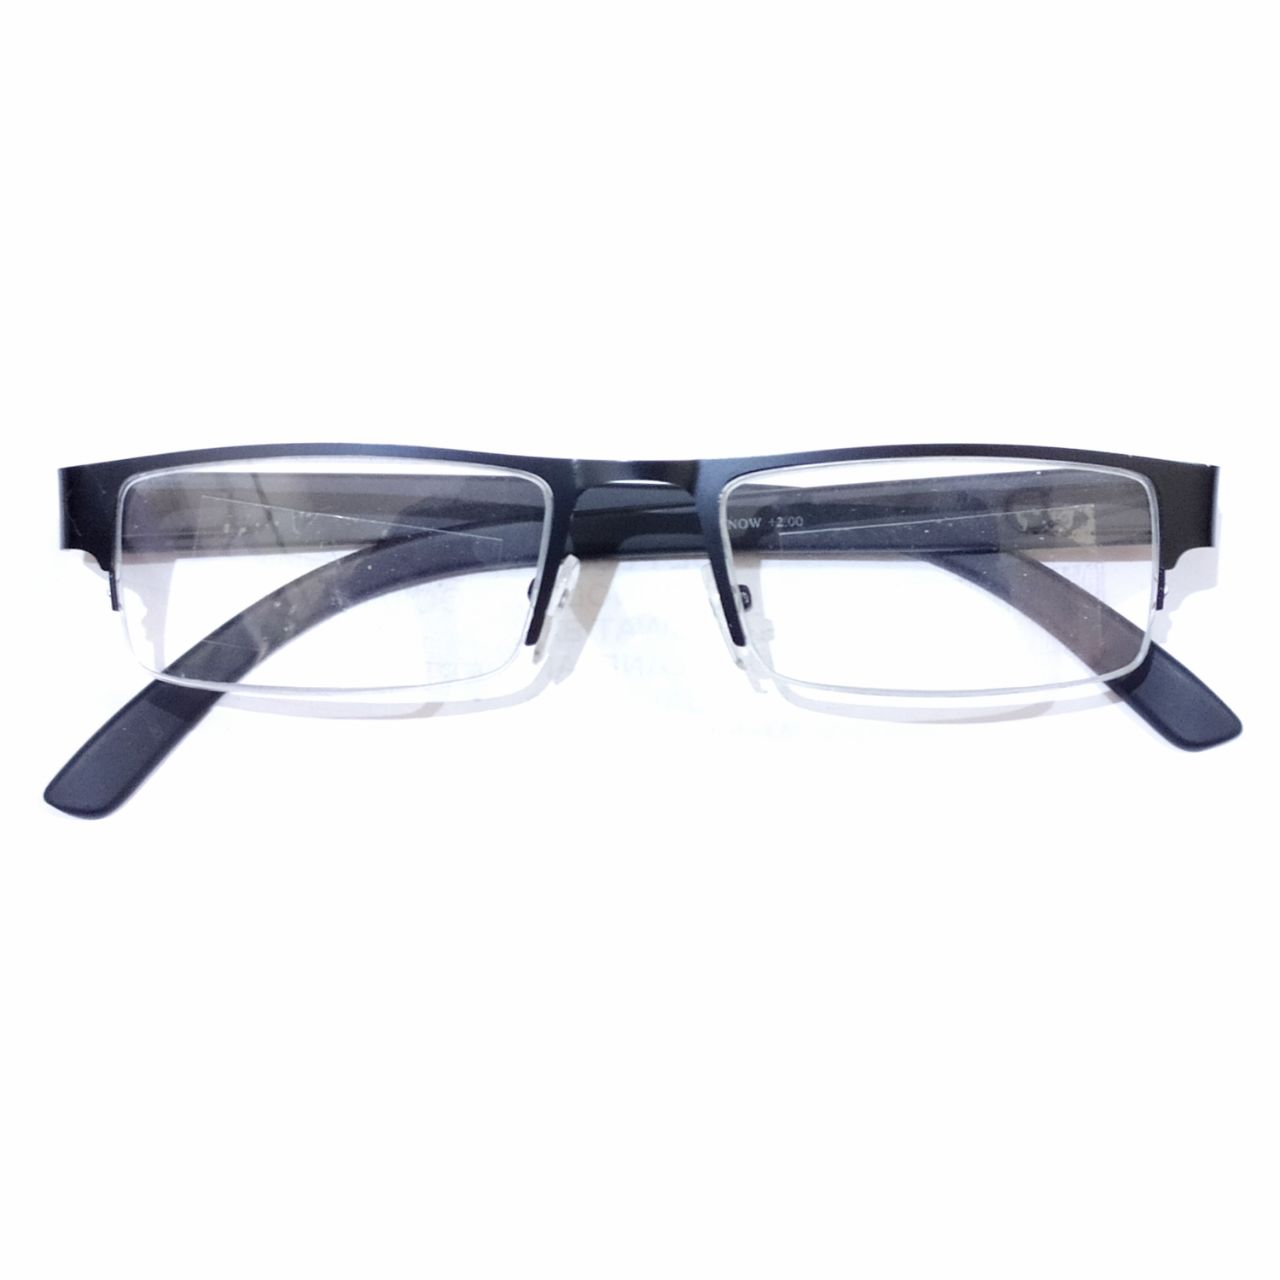 Supra Reading Glasses - Classic Black Metal Frame with Spring Hinges